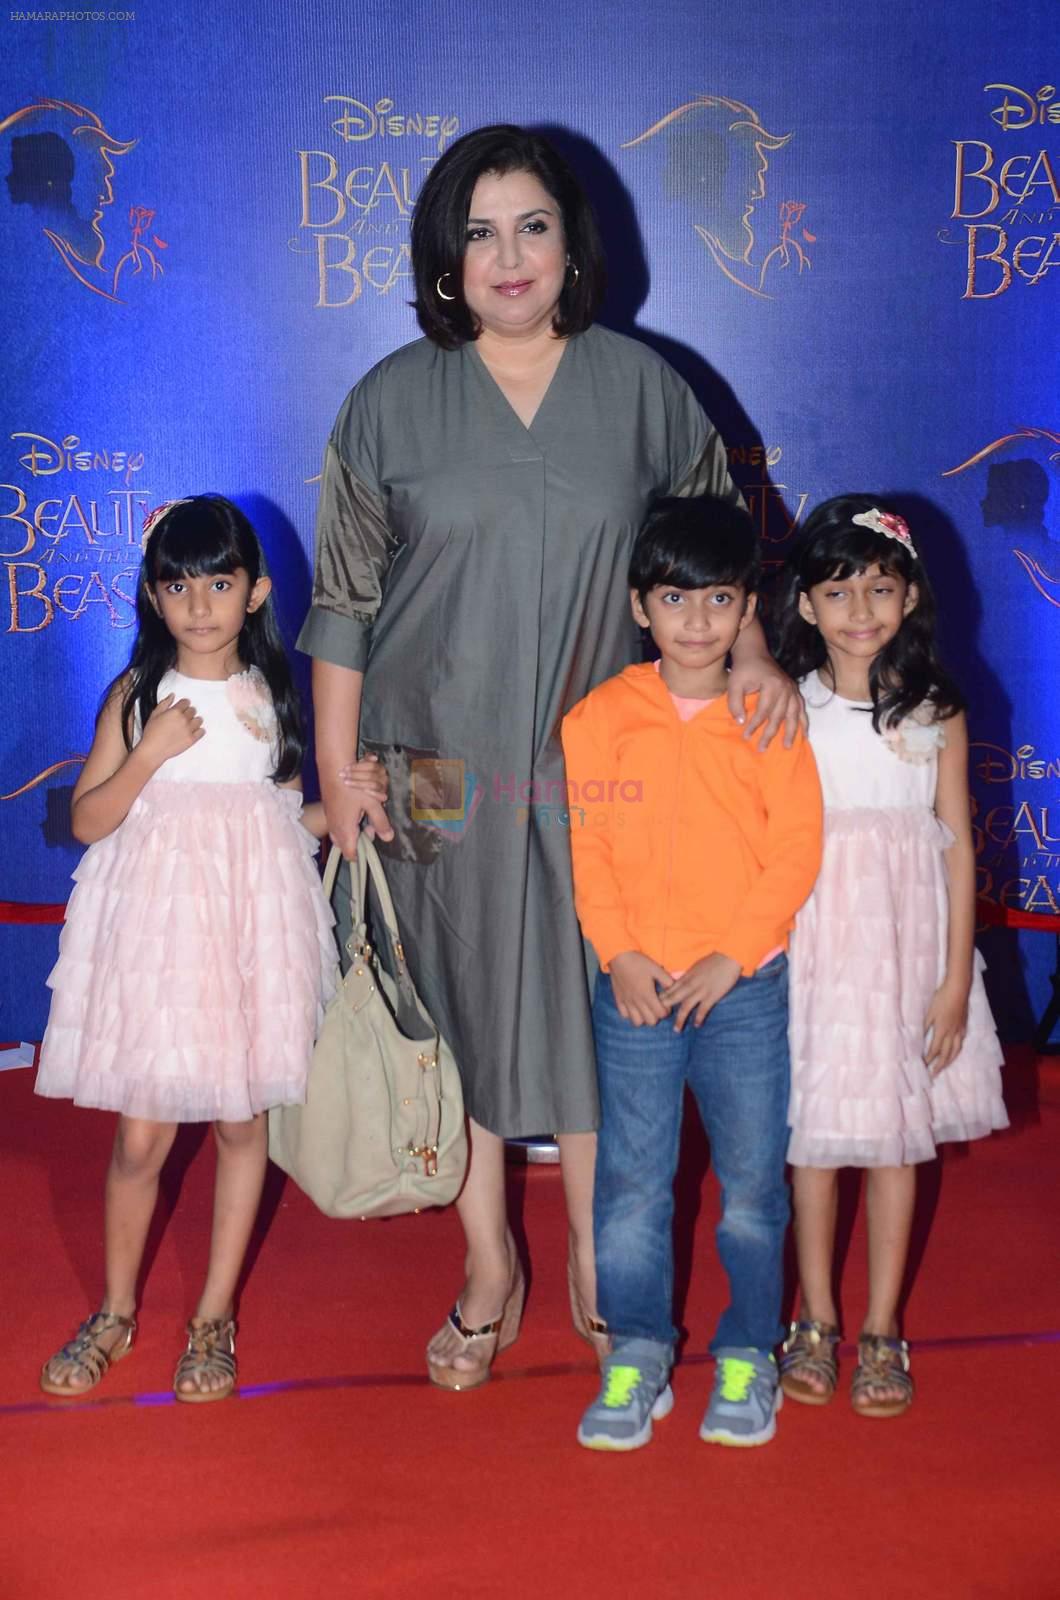 Farah Khan at Beauty and the Beast red carpet in Mumbai on 21st Oct 2015